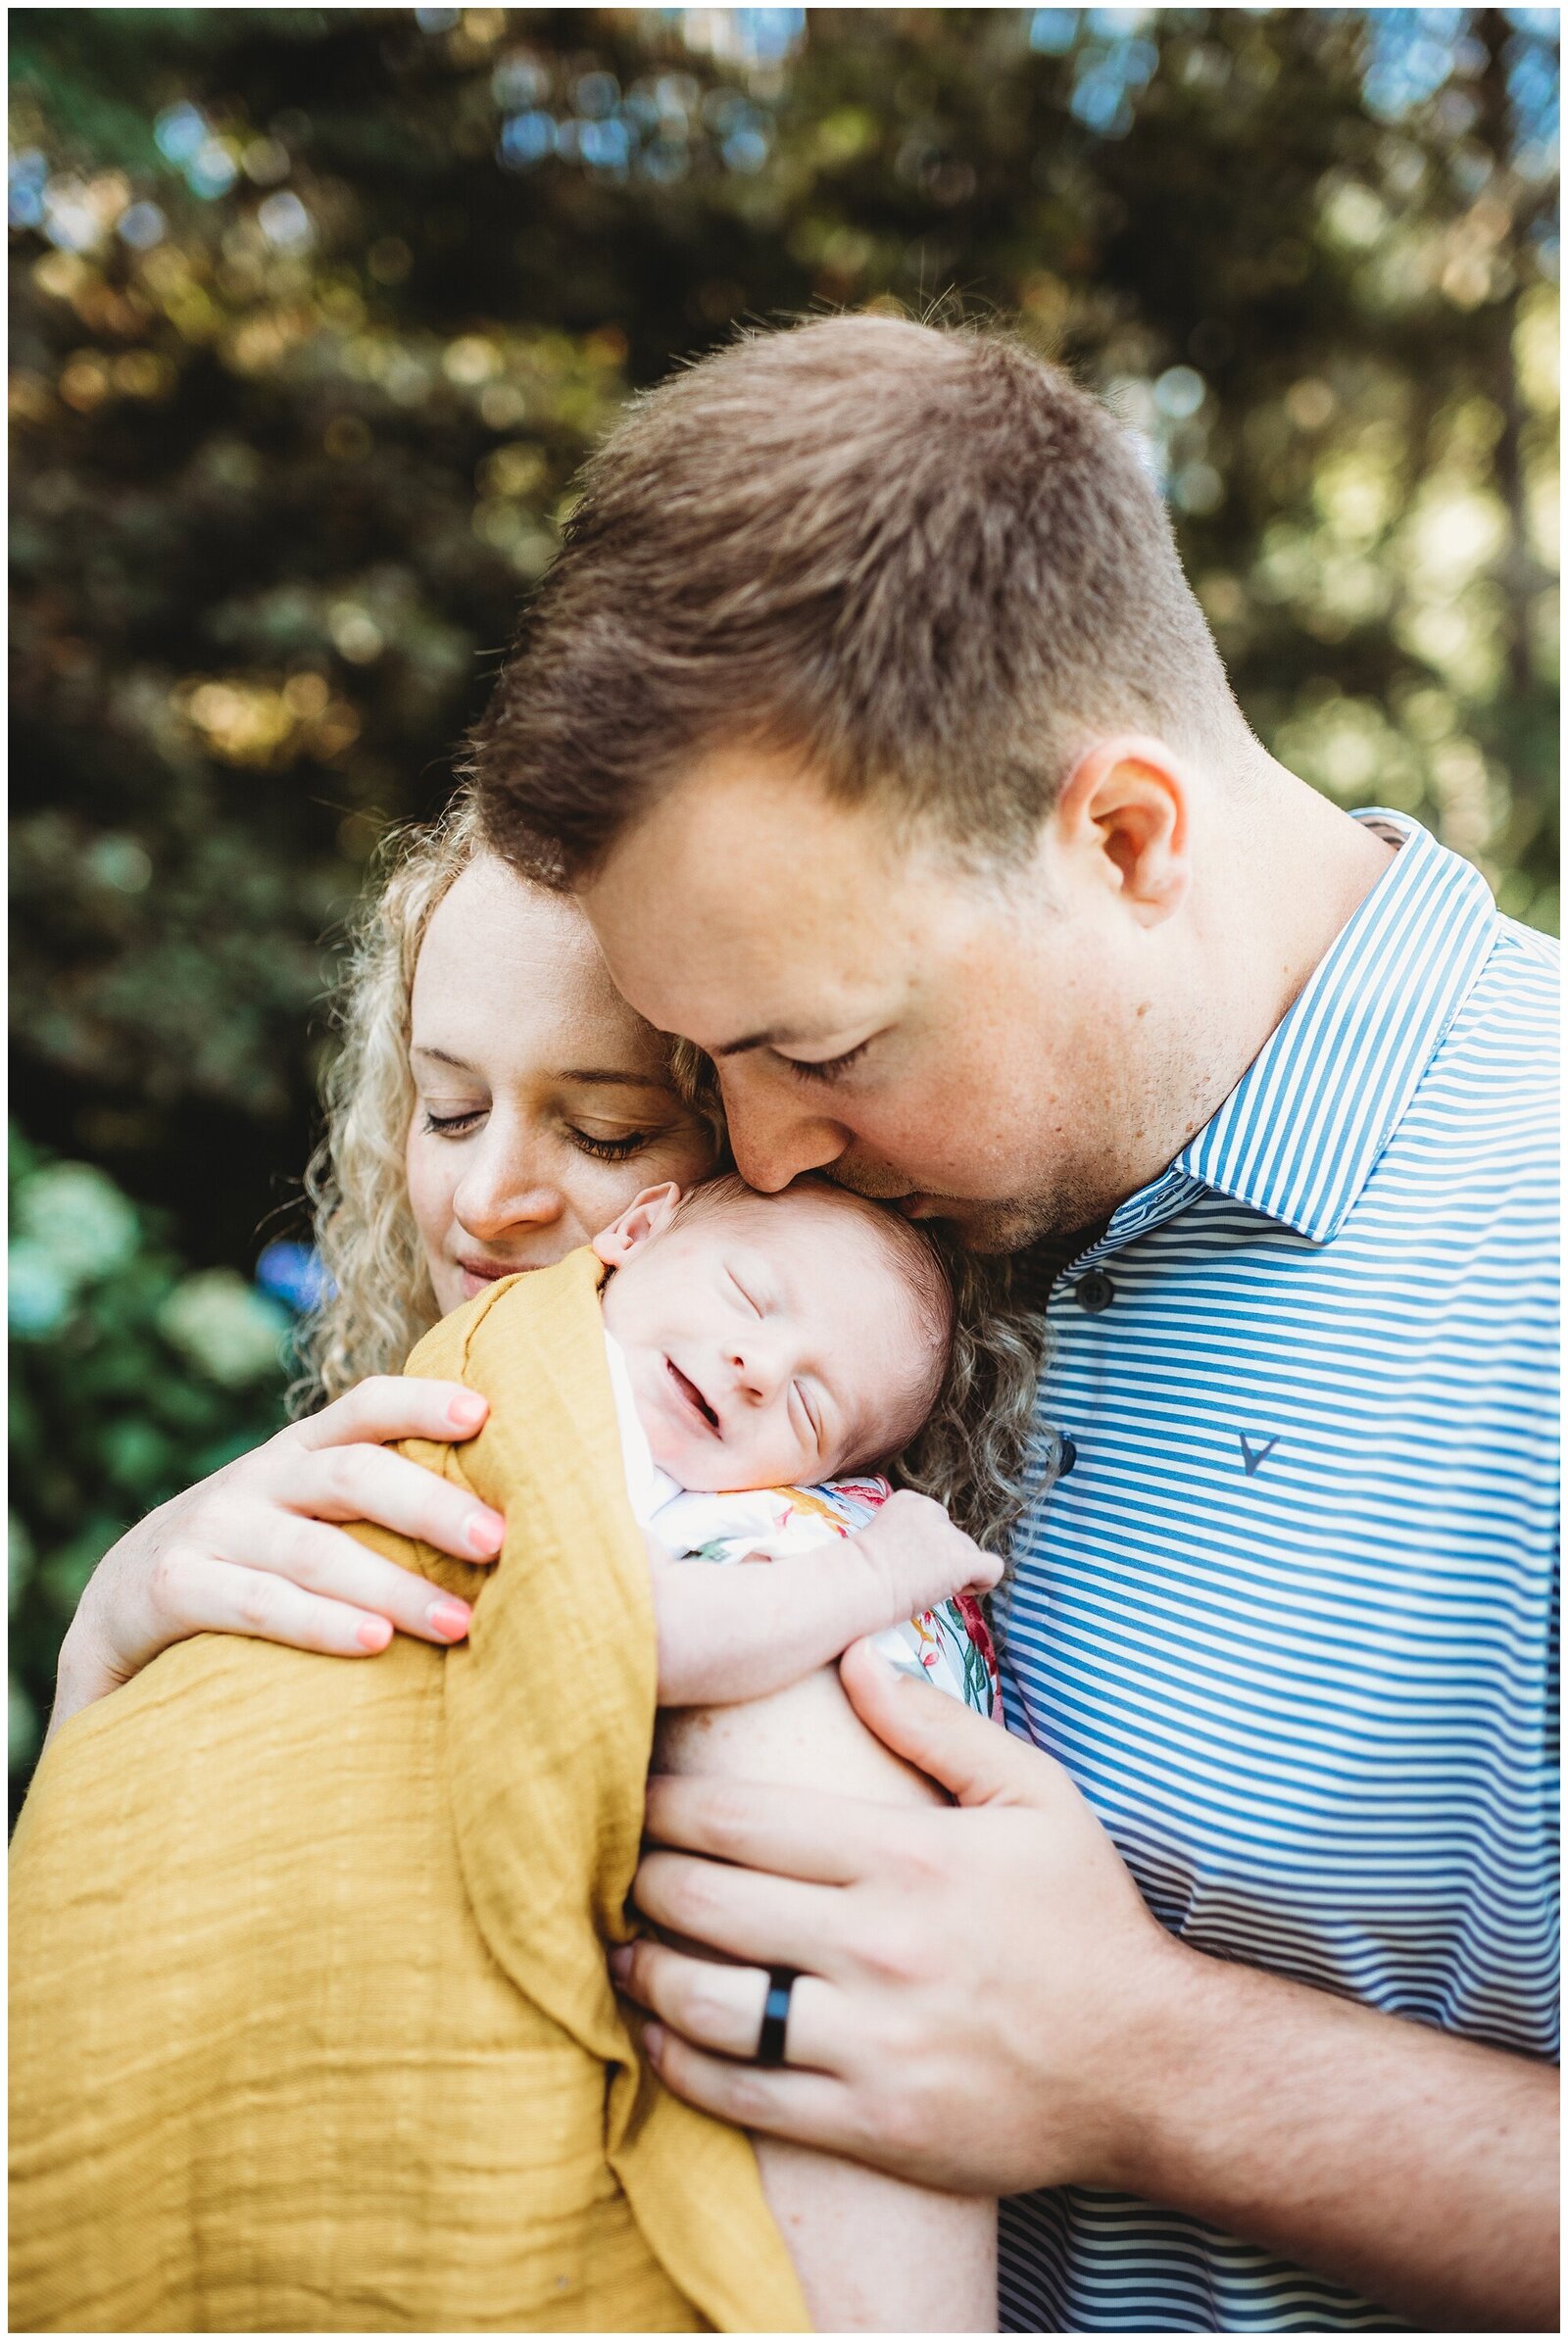 Outdoor newborn photography sweet family of three Emily Ann Photography Seattle Photographer